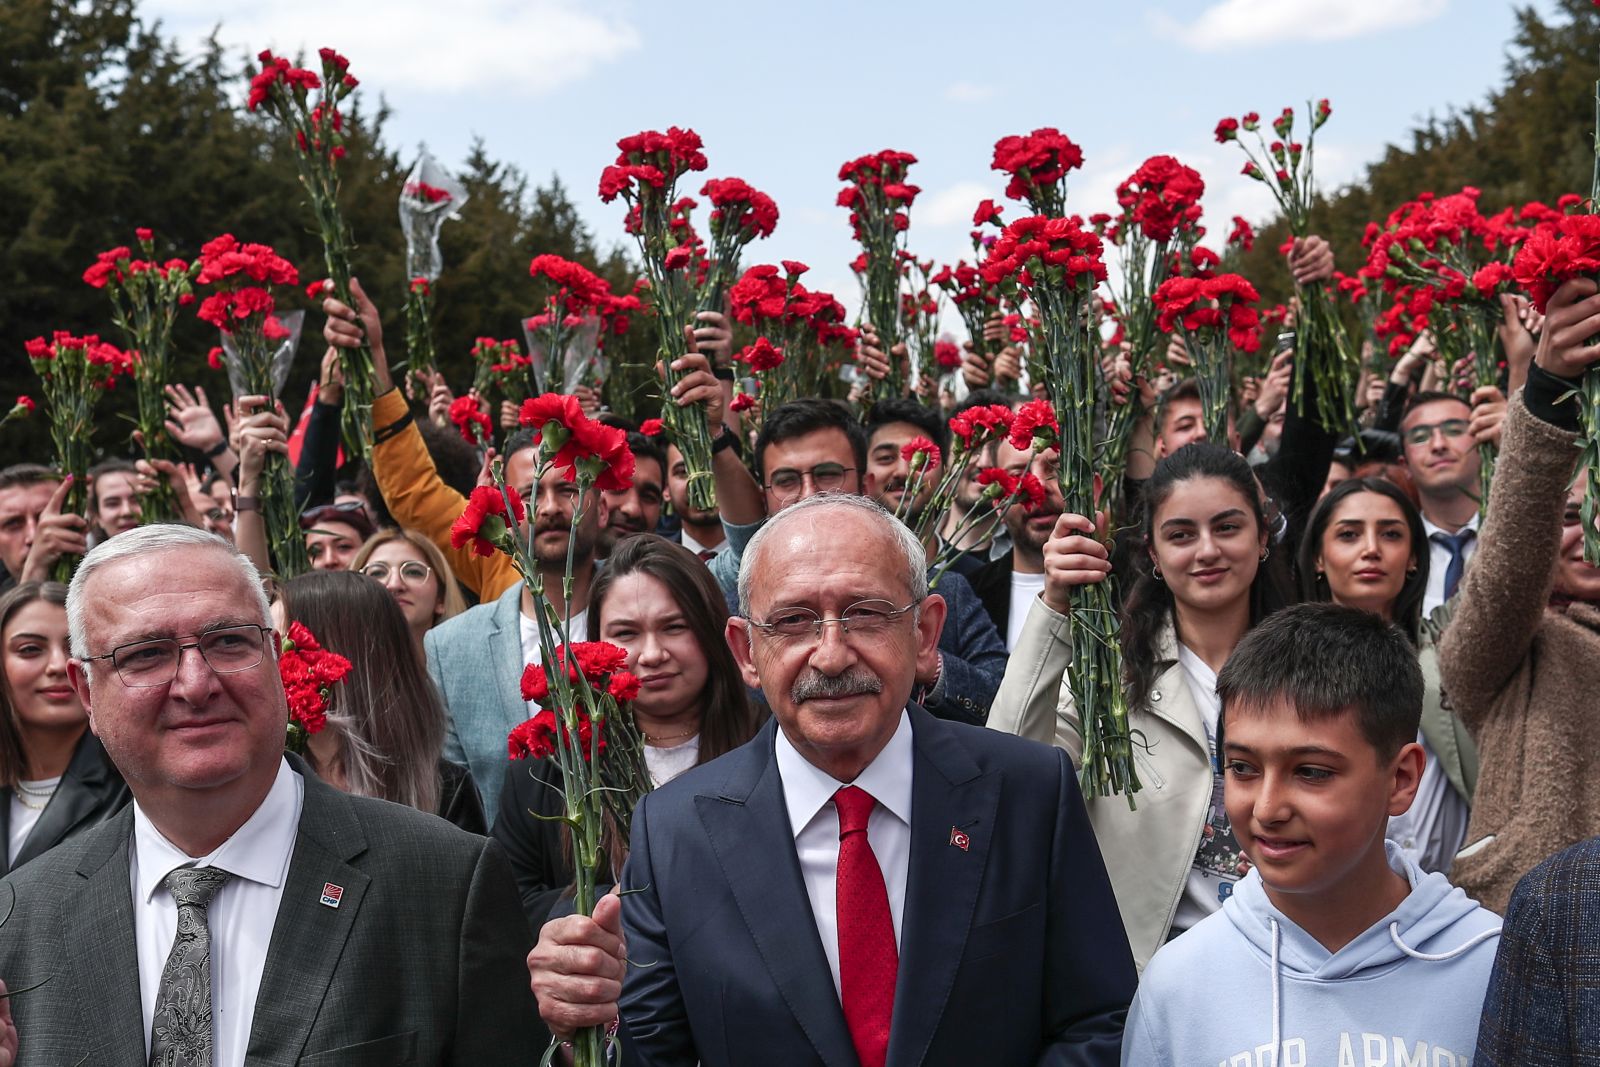 epa10624764 Turkish presidential candidate Kemal Kilicdaroglu (C), leader of the opposition Republican People's Party (CHP), carries flowers as he visits Anitkabir, the mausoleum of the founder and first President of the Republic of Turkey, Mustafa Kemal Ataturk, in Ankara, Turkey, 13 May 2023. Turkey will hold its general election on 14 May 2023 with a two-round system to elect its president, while parliamentary elections will be held simultaneously.  EPA/SEDAT SUNA